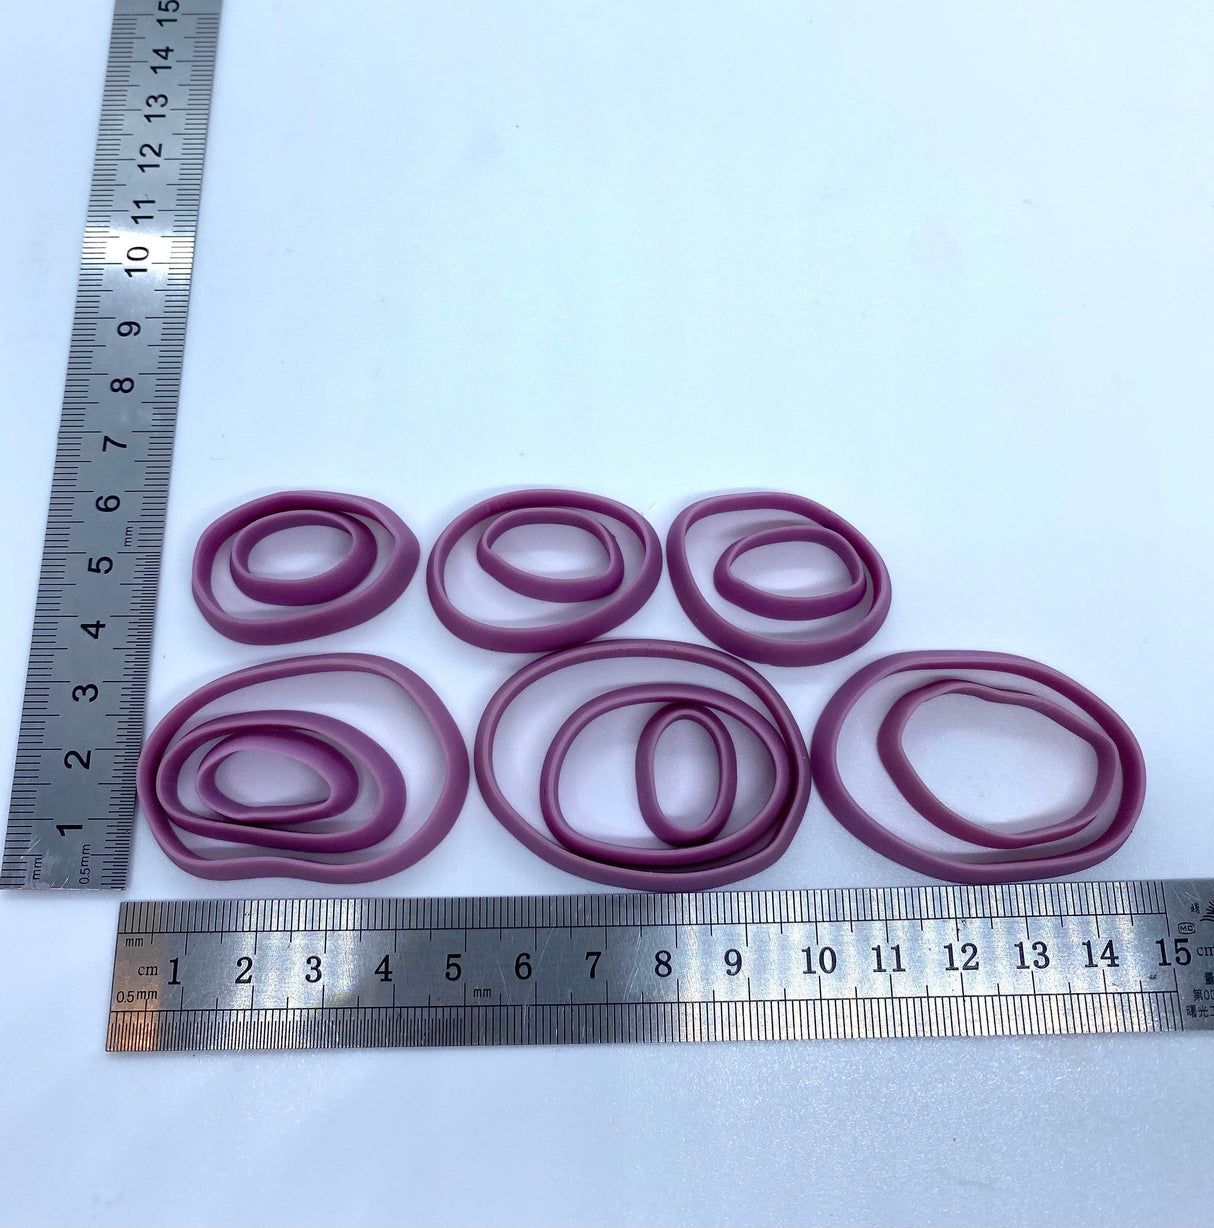 Resin Polymer clay cutters, precious metal clay, ceramic clay cutters, Gilly cutters (slumped ovals)